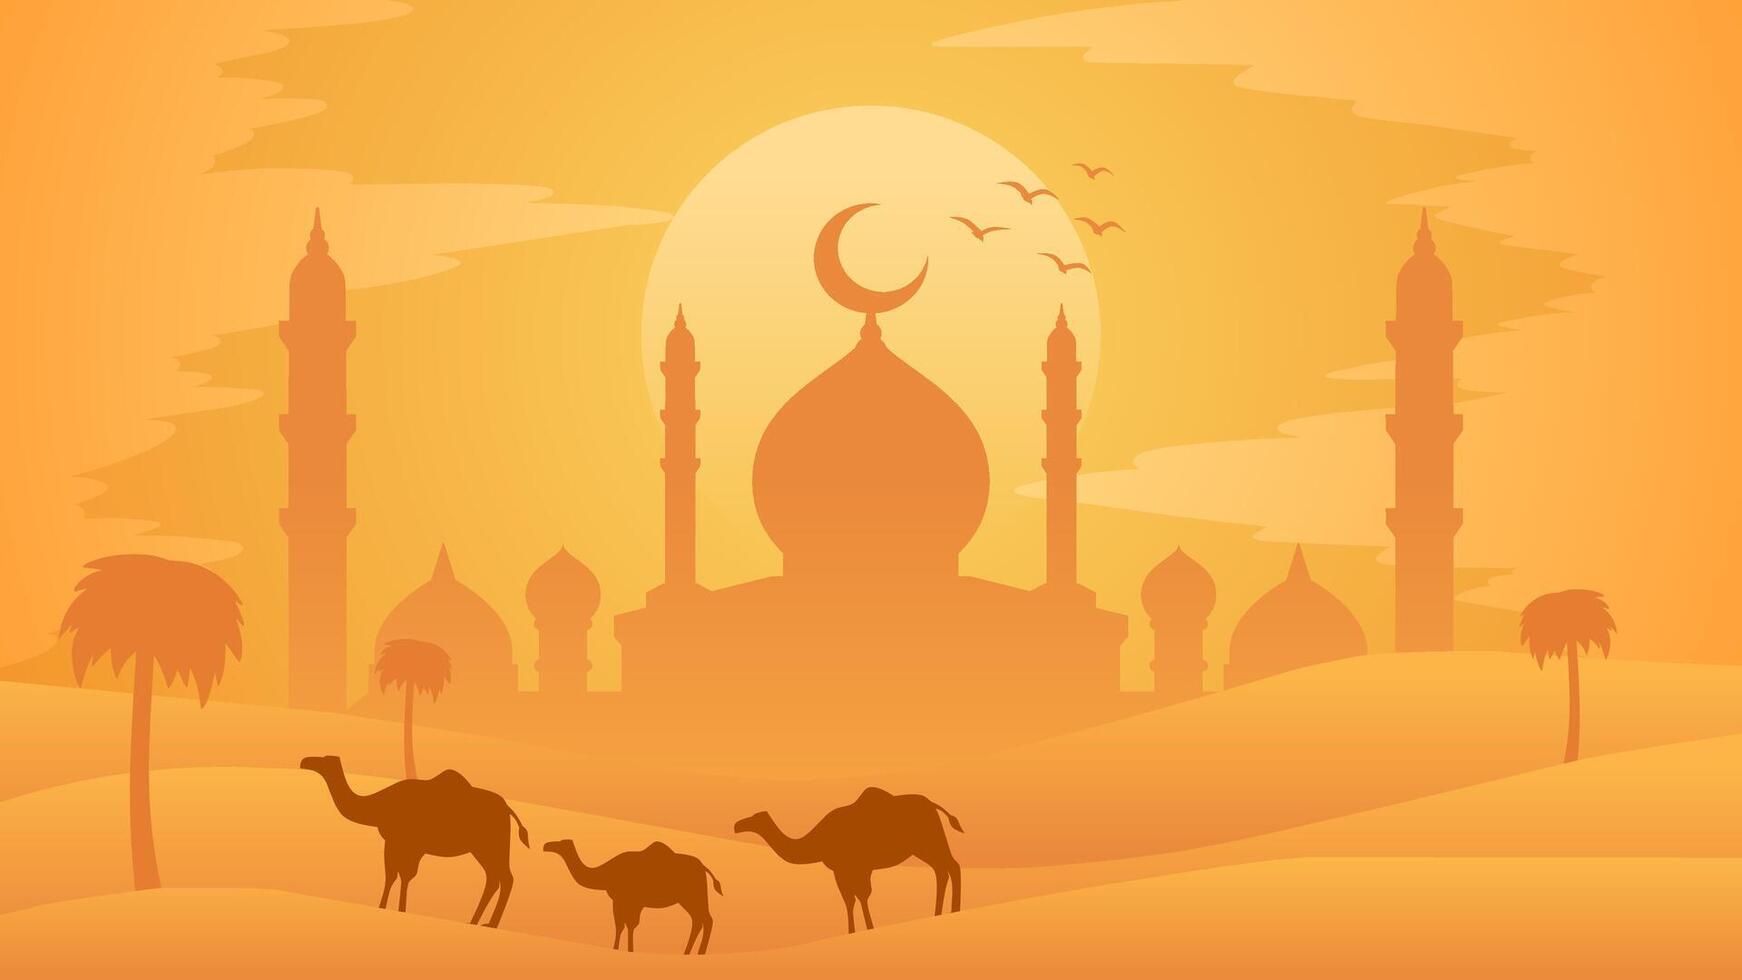 Ramadan landscape vector illustration. Mosque silhouette and camel in the desert with sunset sky. Mosque landscape for illustration, background or ramadan. Eid mubarak landscape for ramadan event